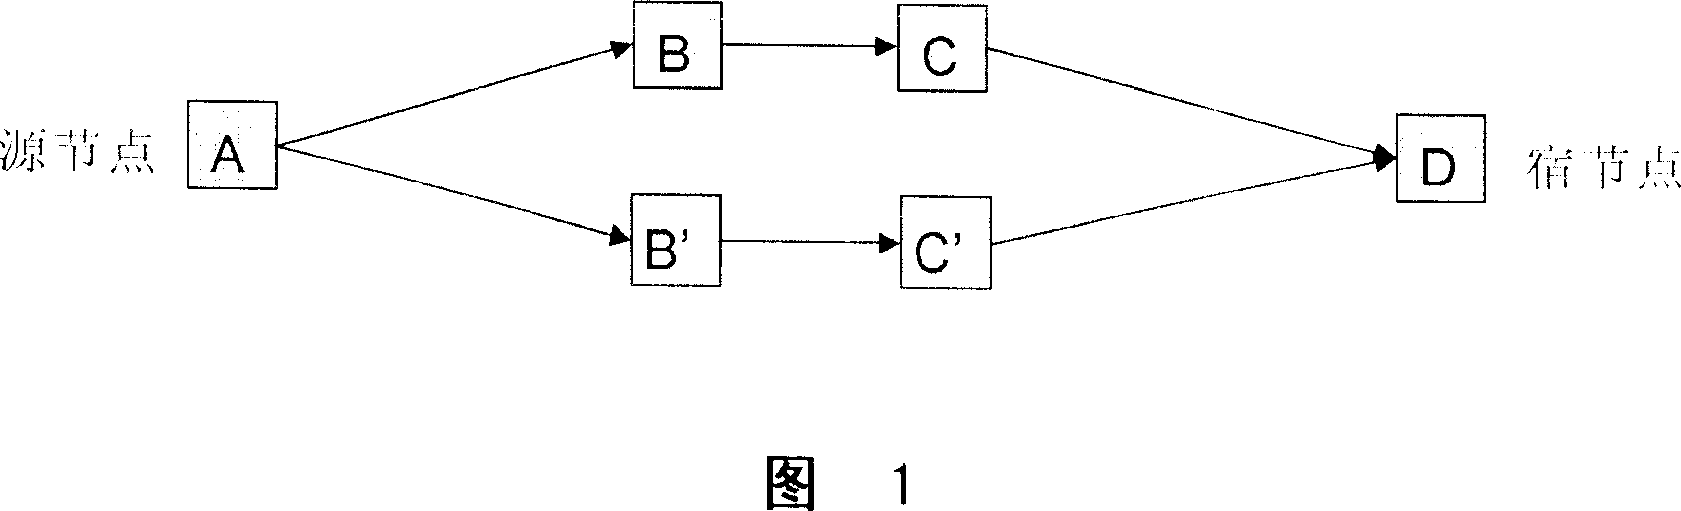 Method for protecting 1+1 single sub-network connection and communication network using the method